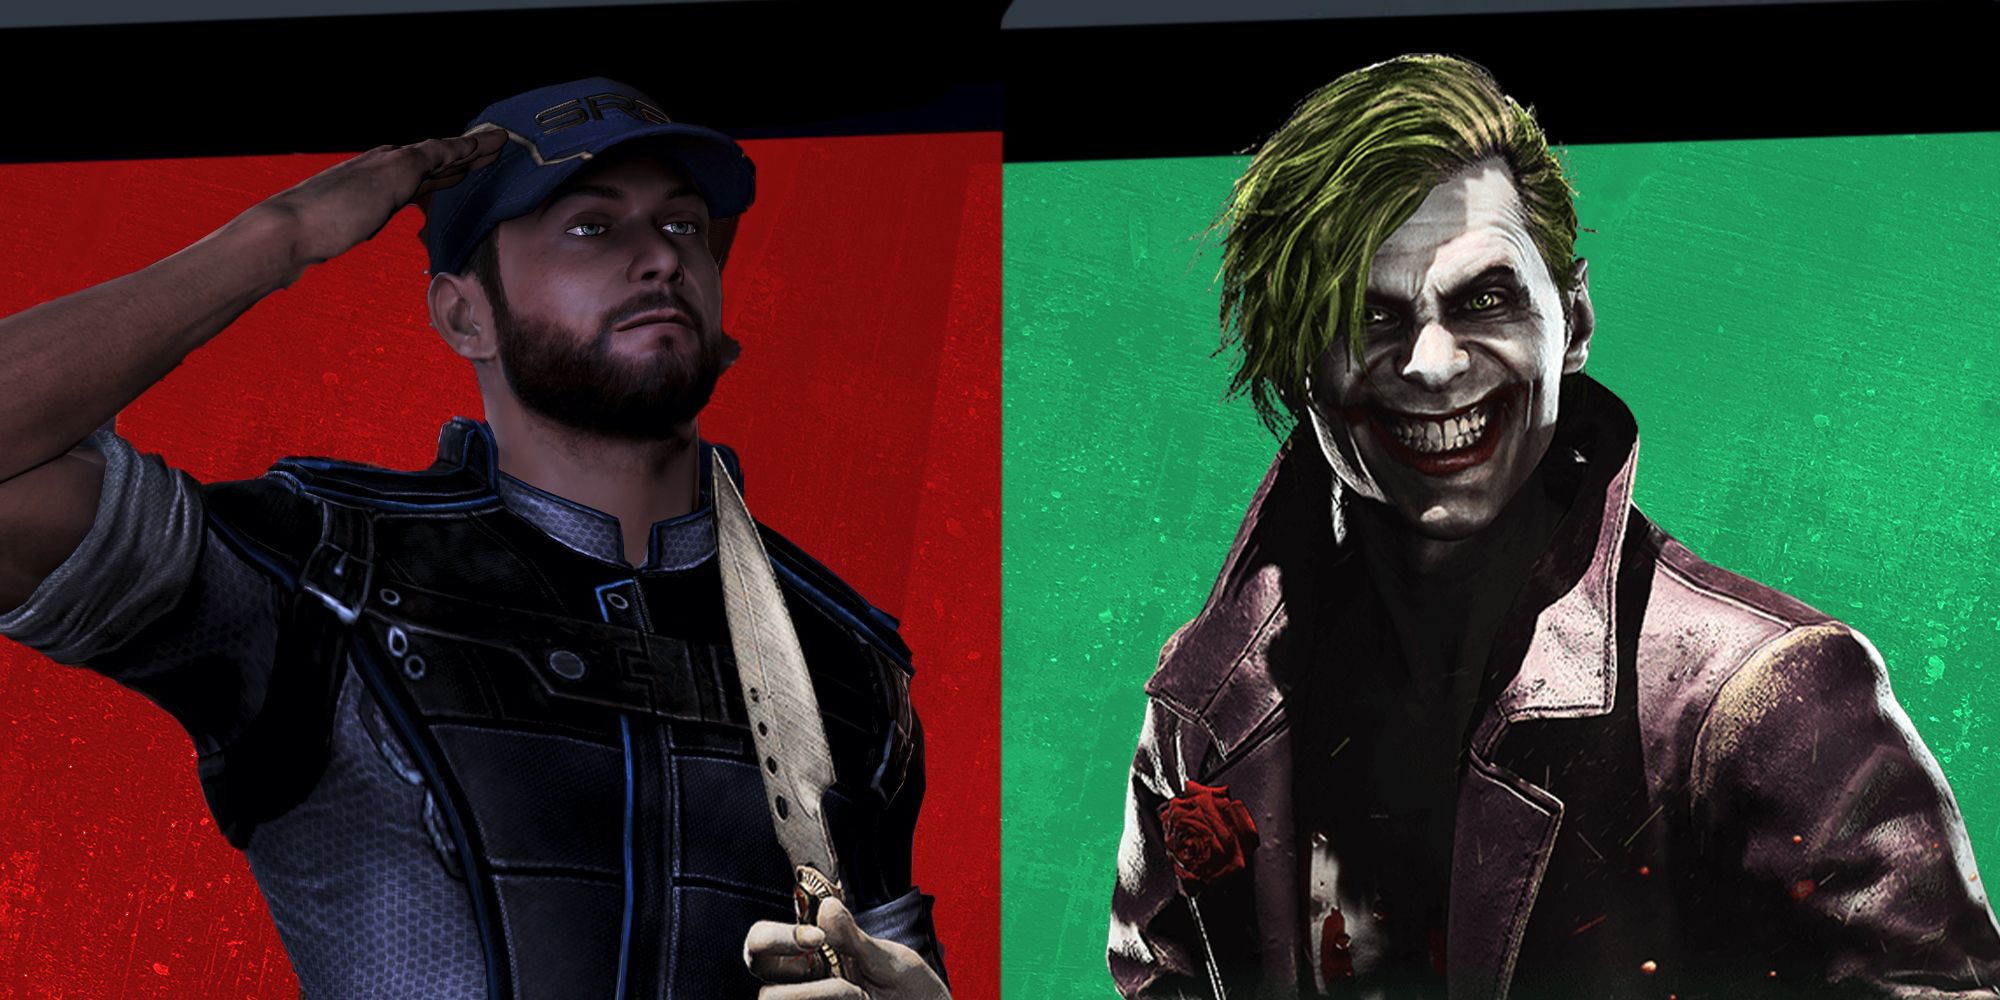 Joker from Mass Effect saluting on the left against a red background. Batman's Joker smiling on the right with a green backdrop.